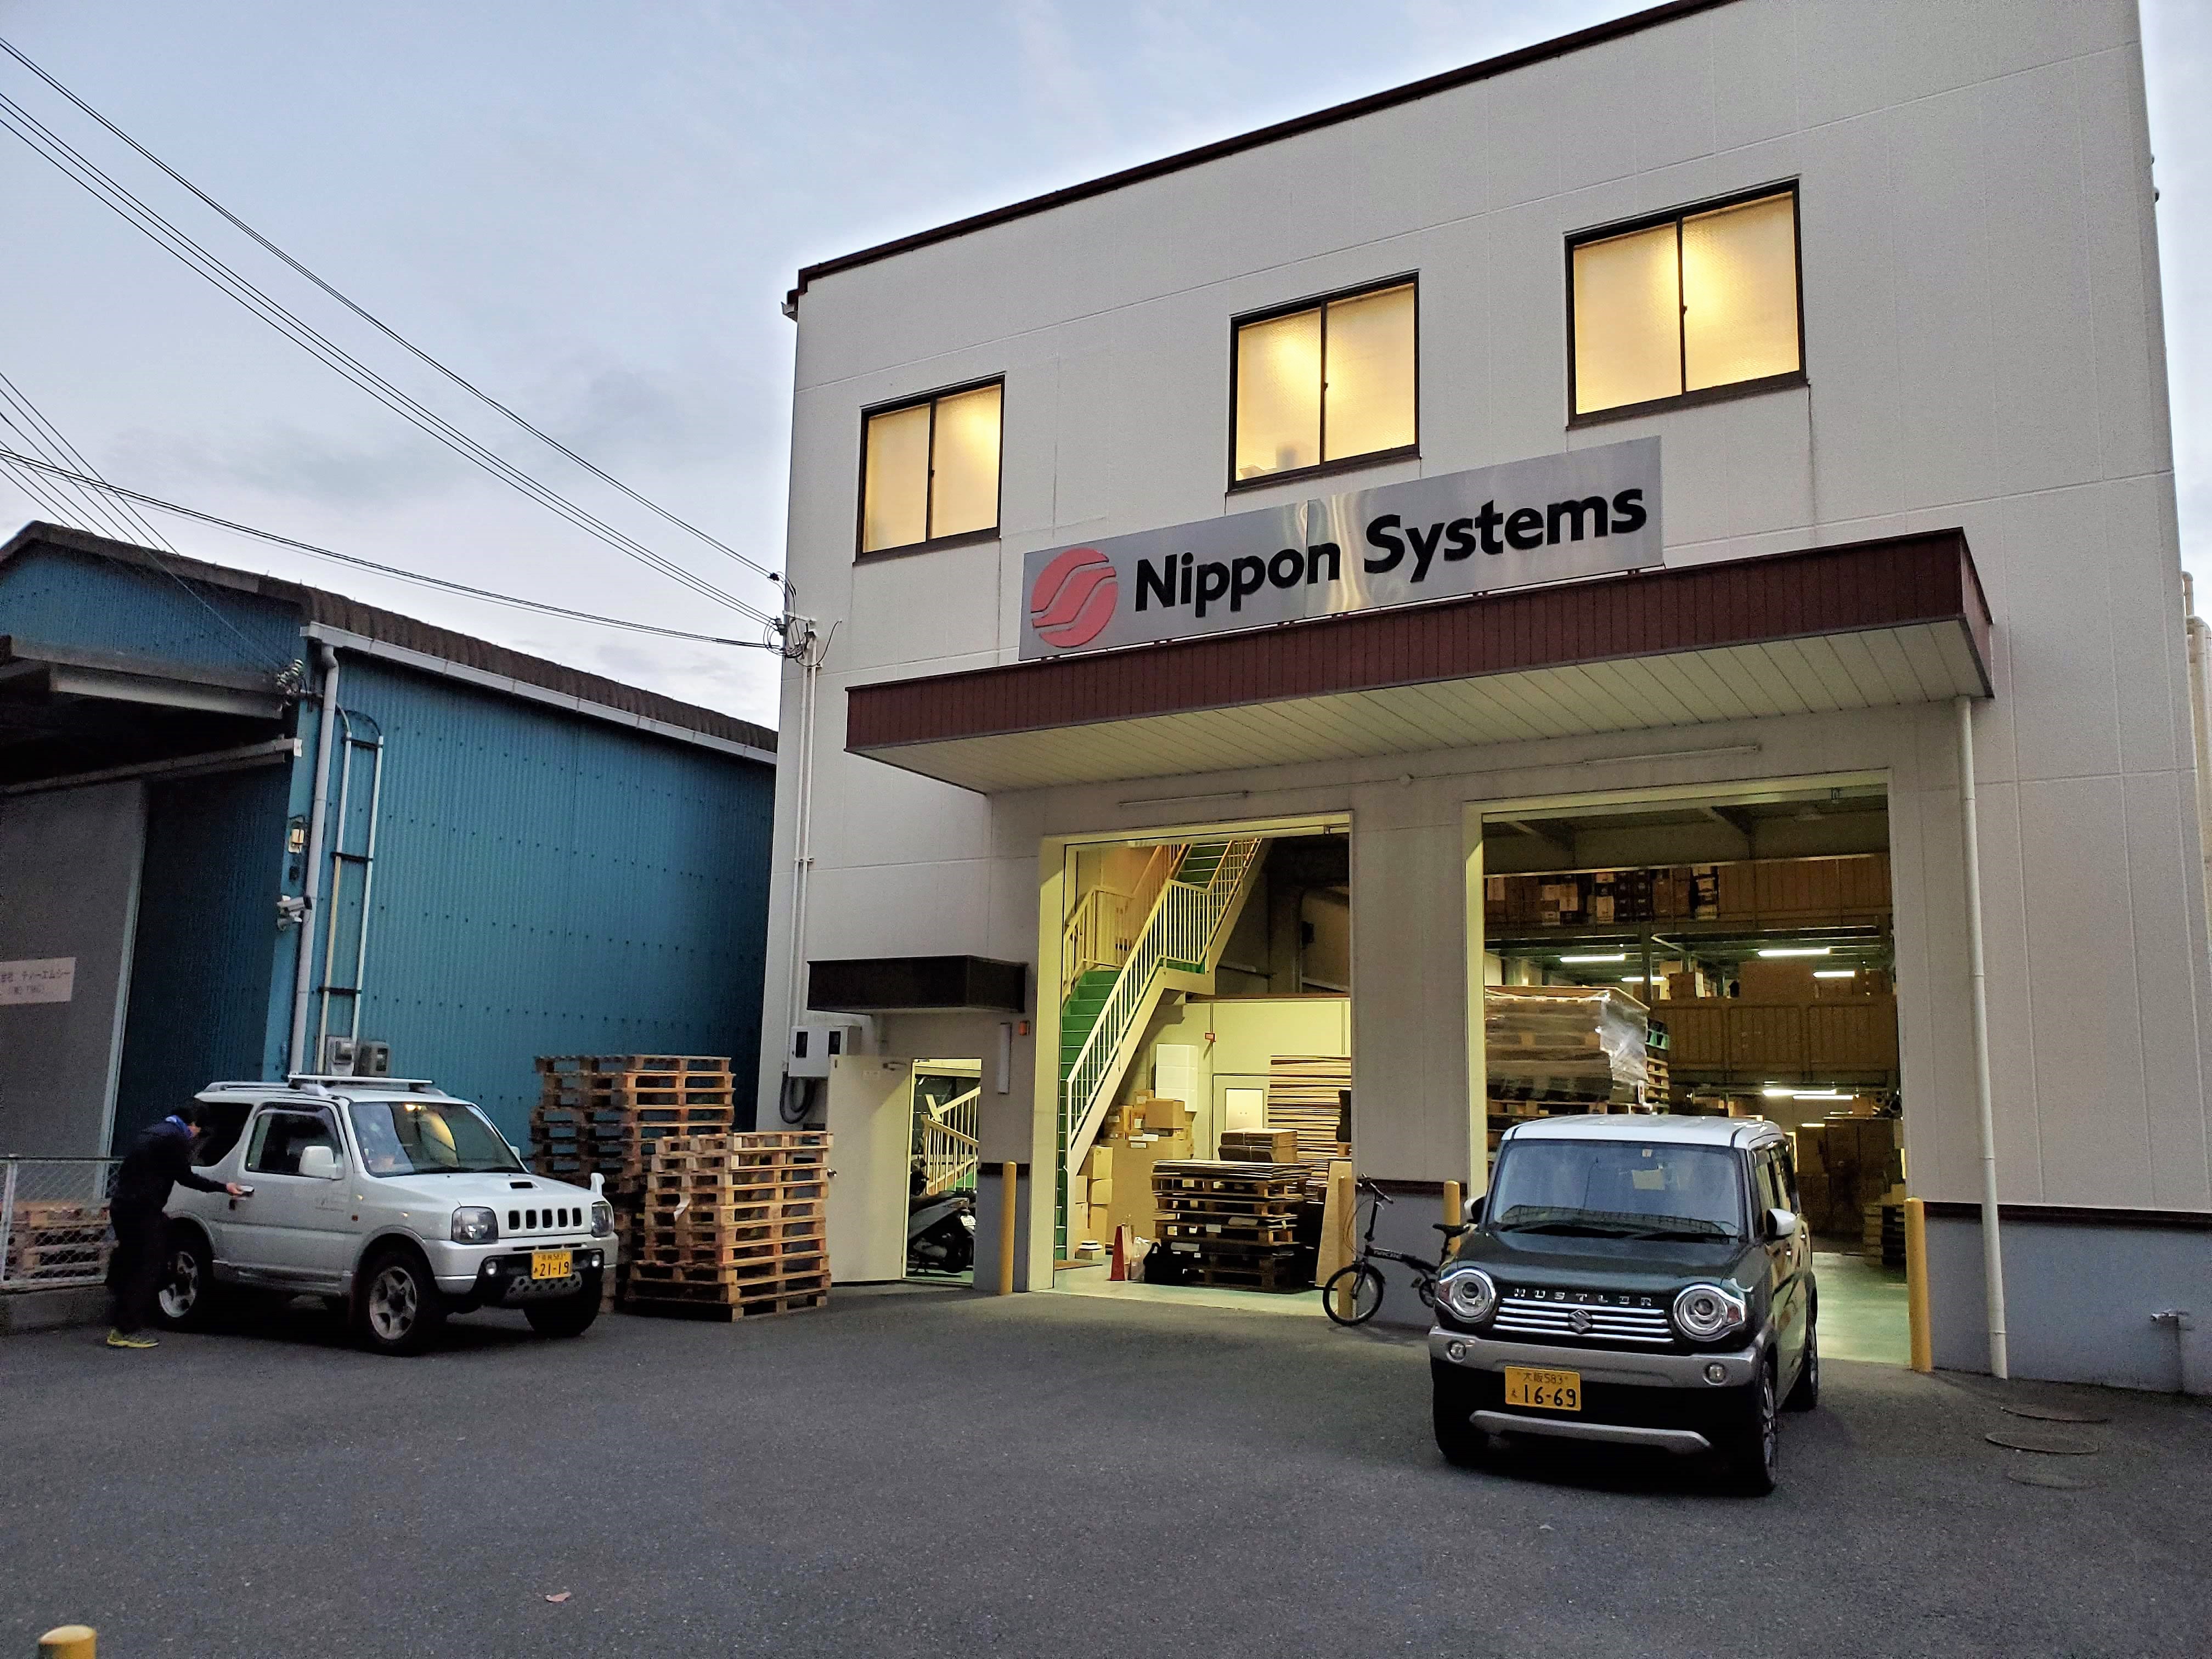 Box Latch - Doors open on warehouse. Nippon Systems, Japan